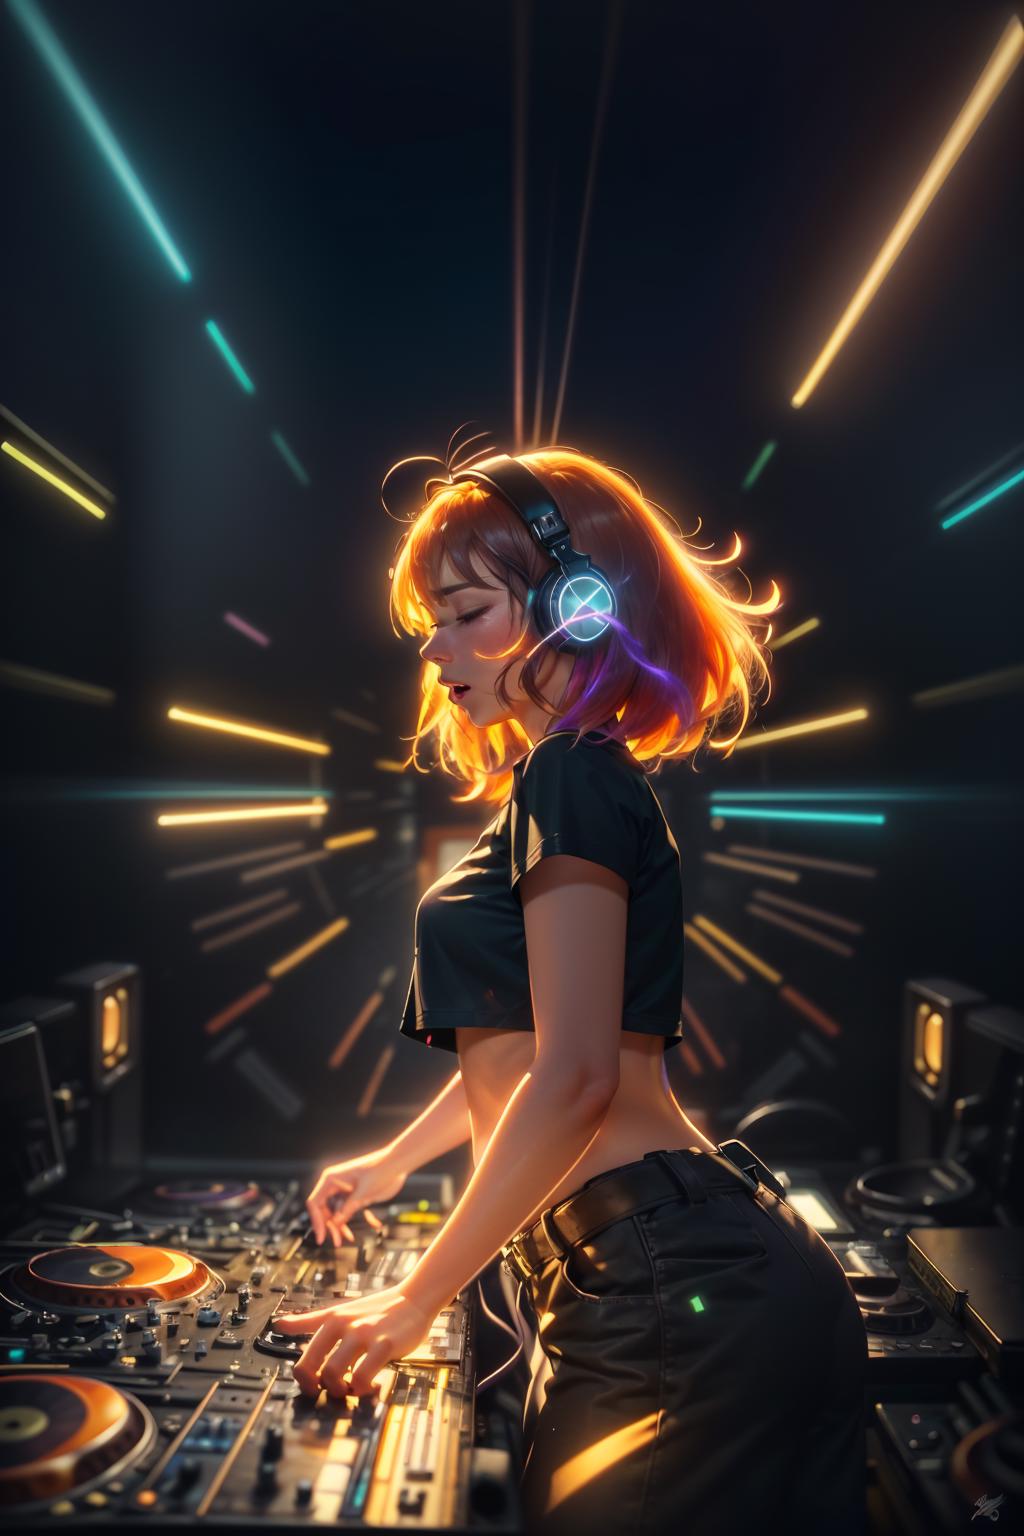 Attractive DJ girl at the hot dance beach party. DJ console turntable,  headphones. Evening light. Palm trees on background. Hot summer vacation  nightlife. Stock Illustration | Adobe Stock